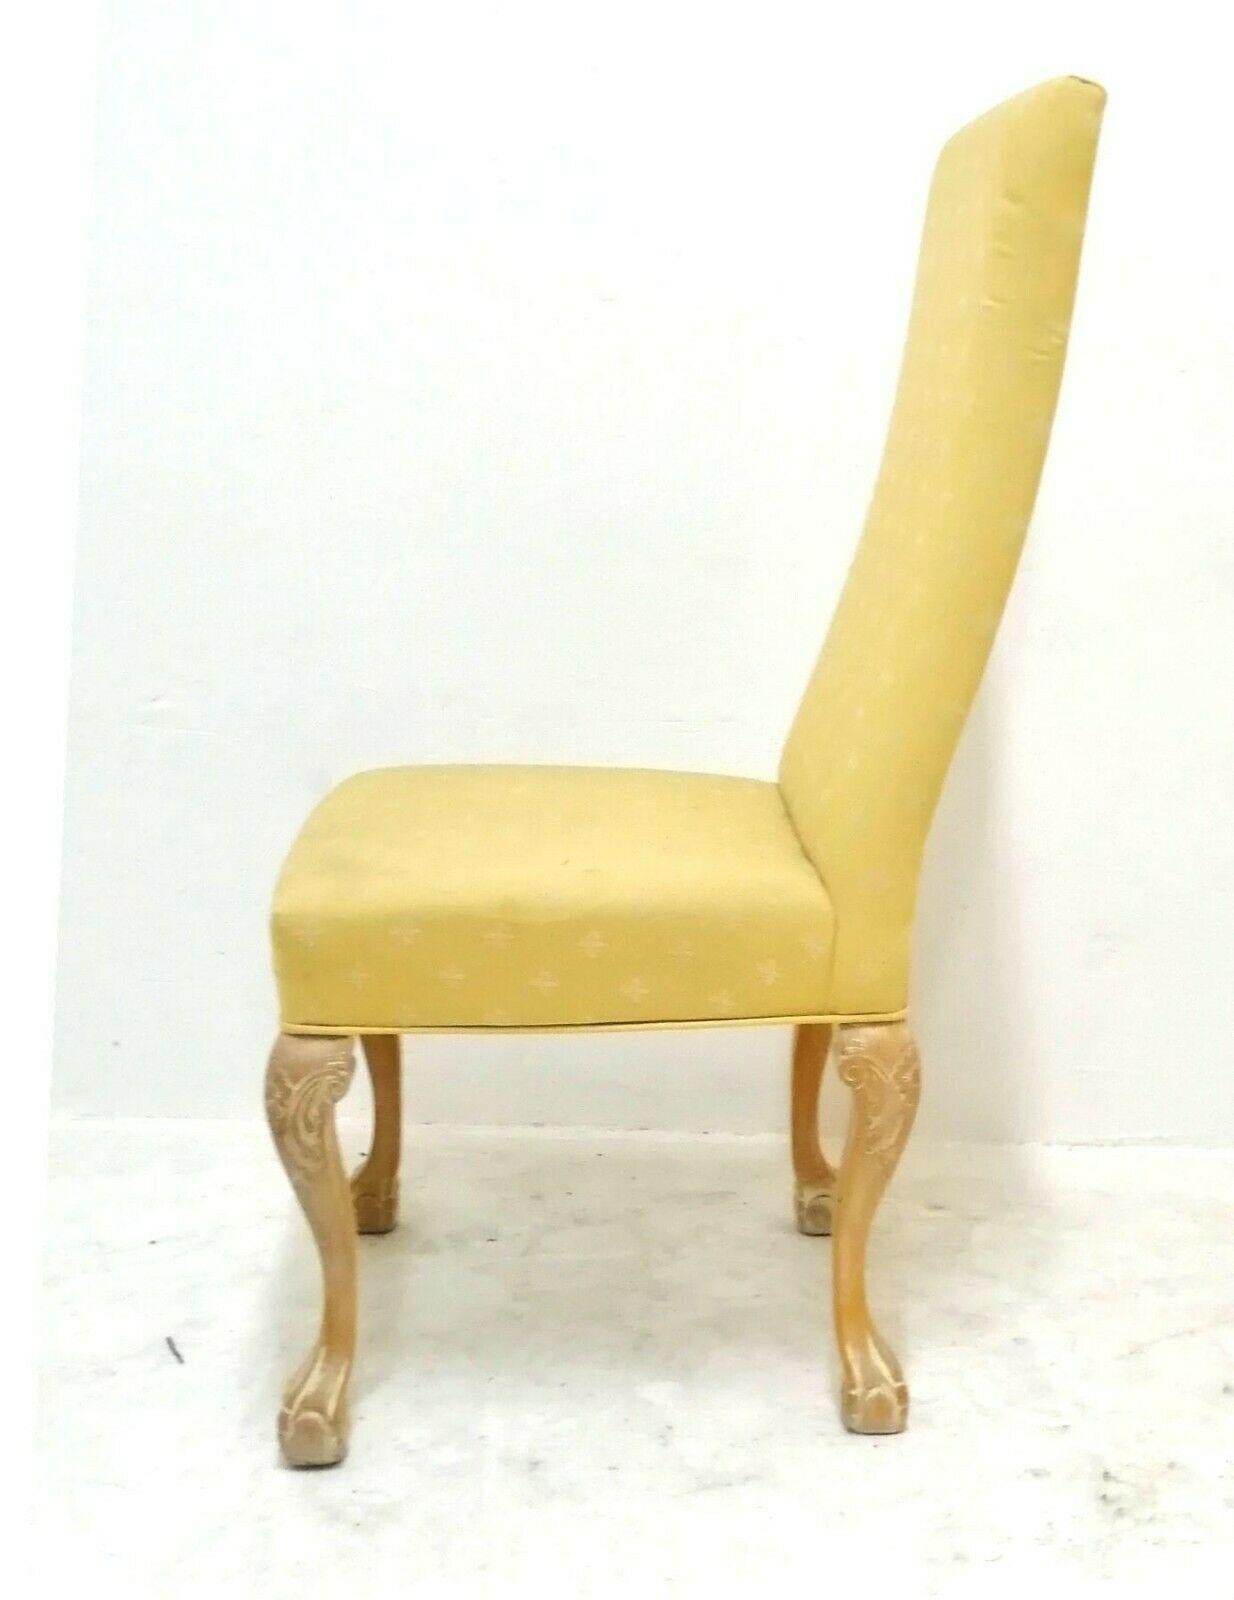 Lot of four classic chairs in carved and pickled wood with fabric of light yellow color

they measure 110 cm in height, 53 cm in width, 65 cm in depth and 50 cm in height of the seat from the ground

In very good condition, as shown in the